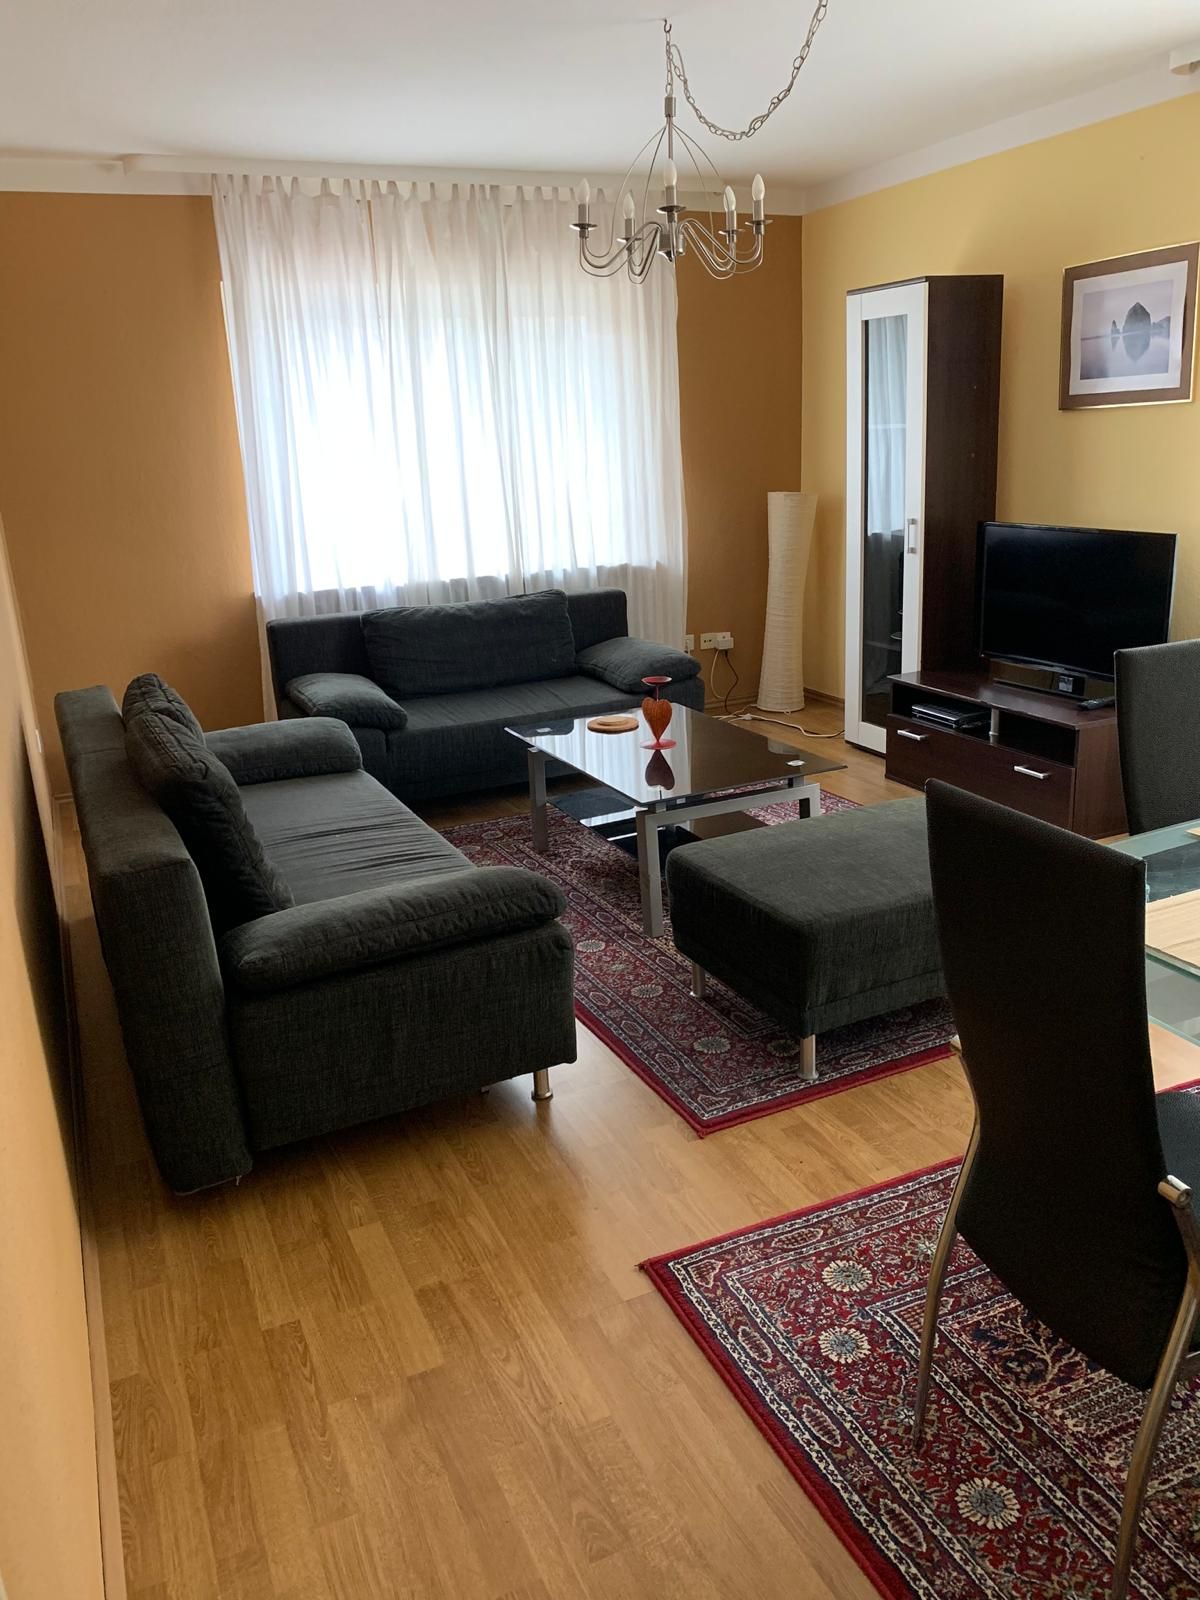 Fully furnished apartment in prime location